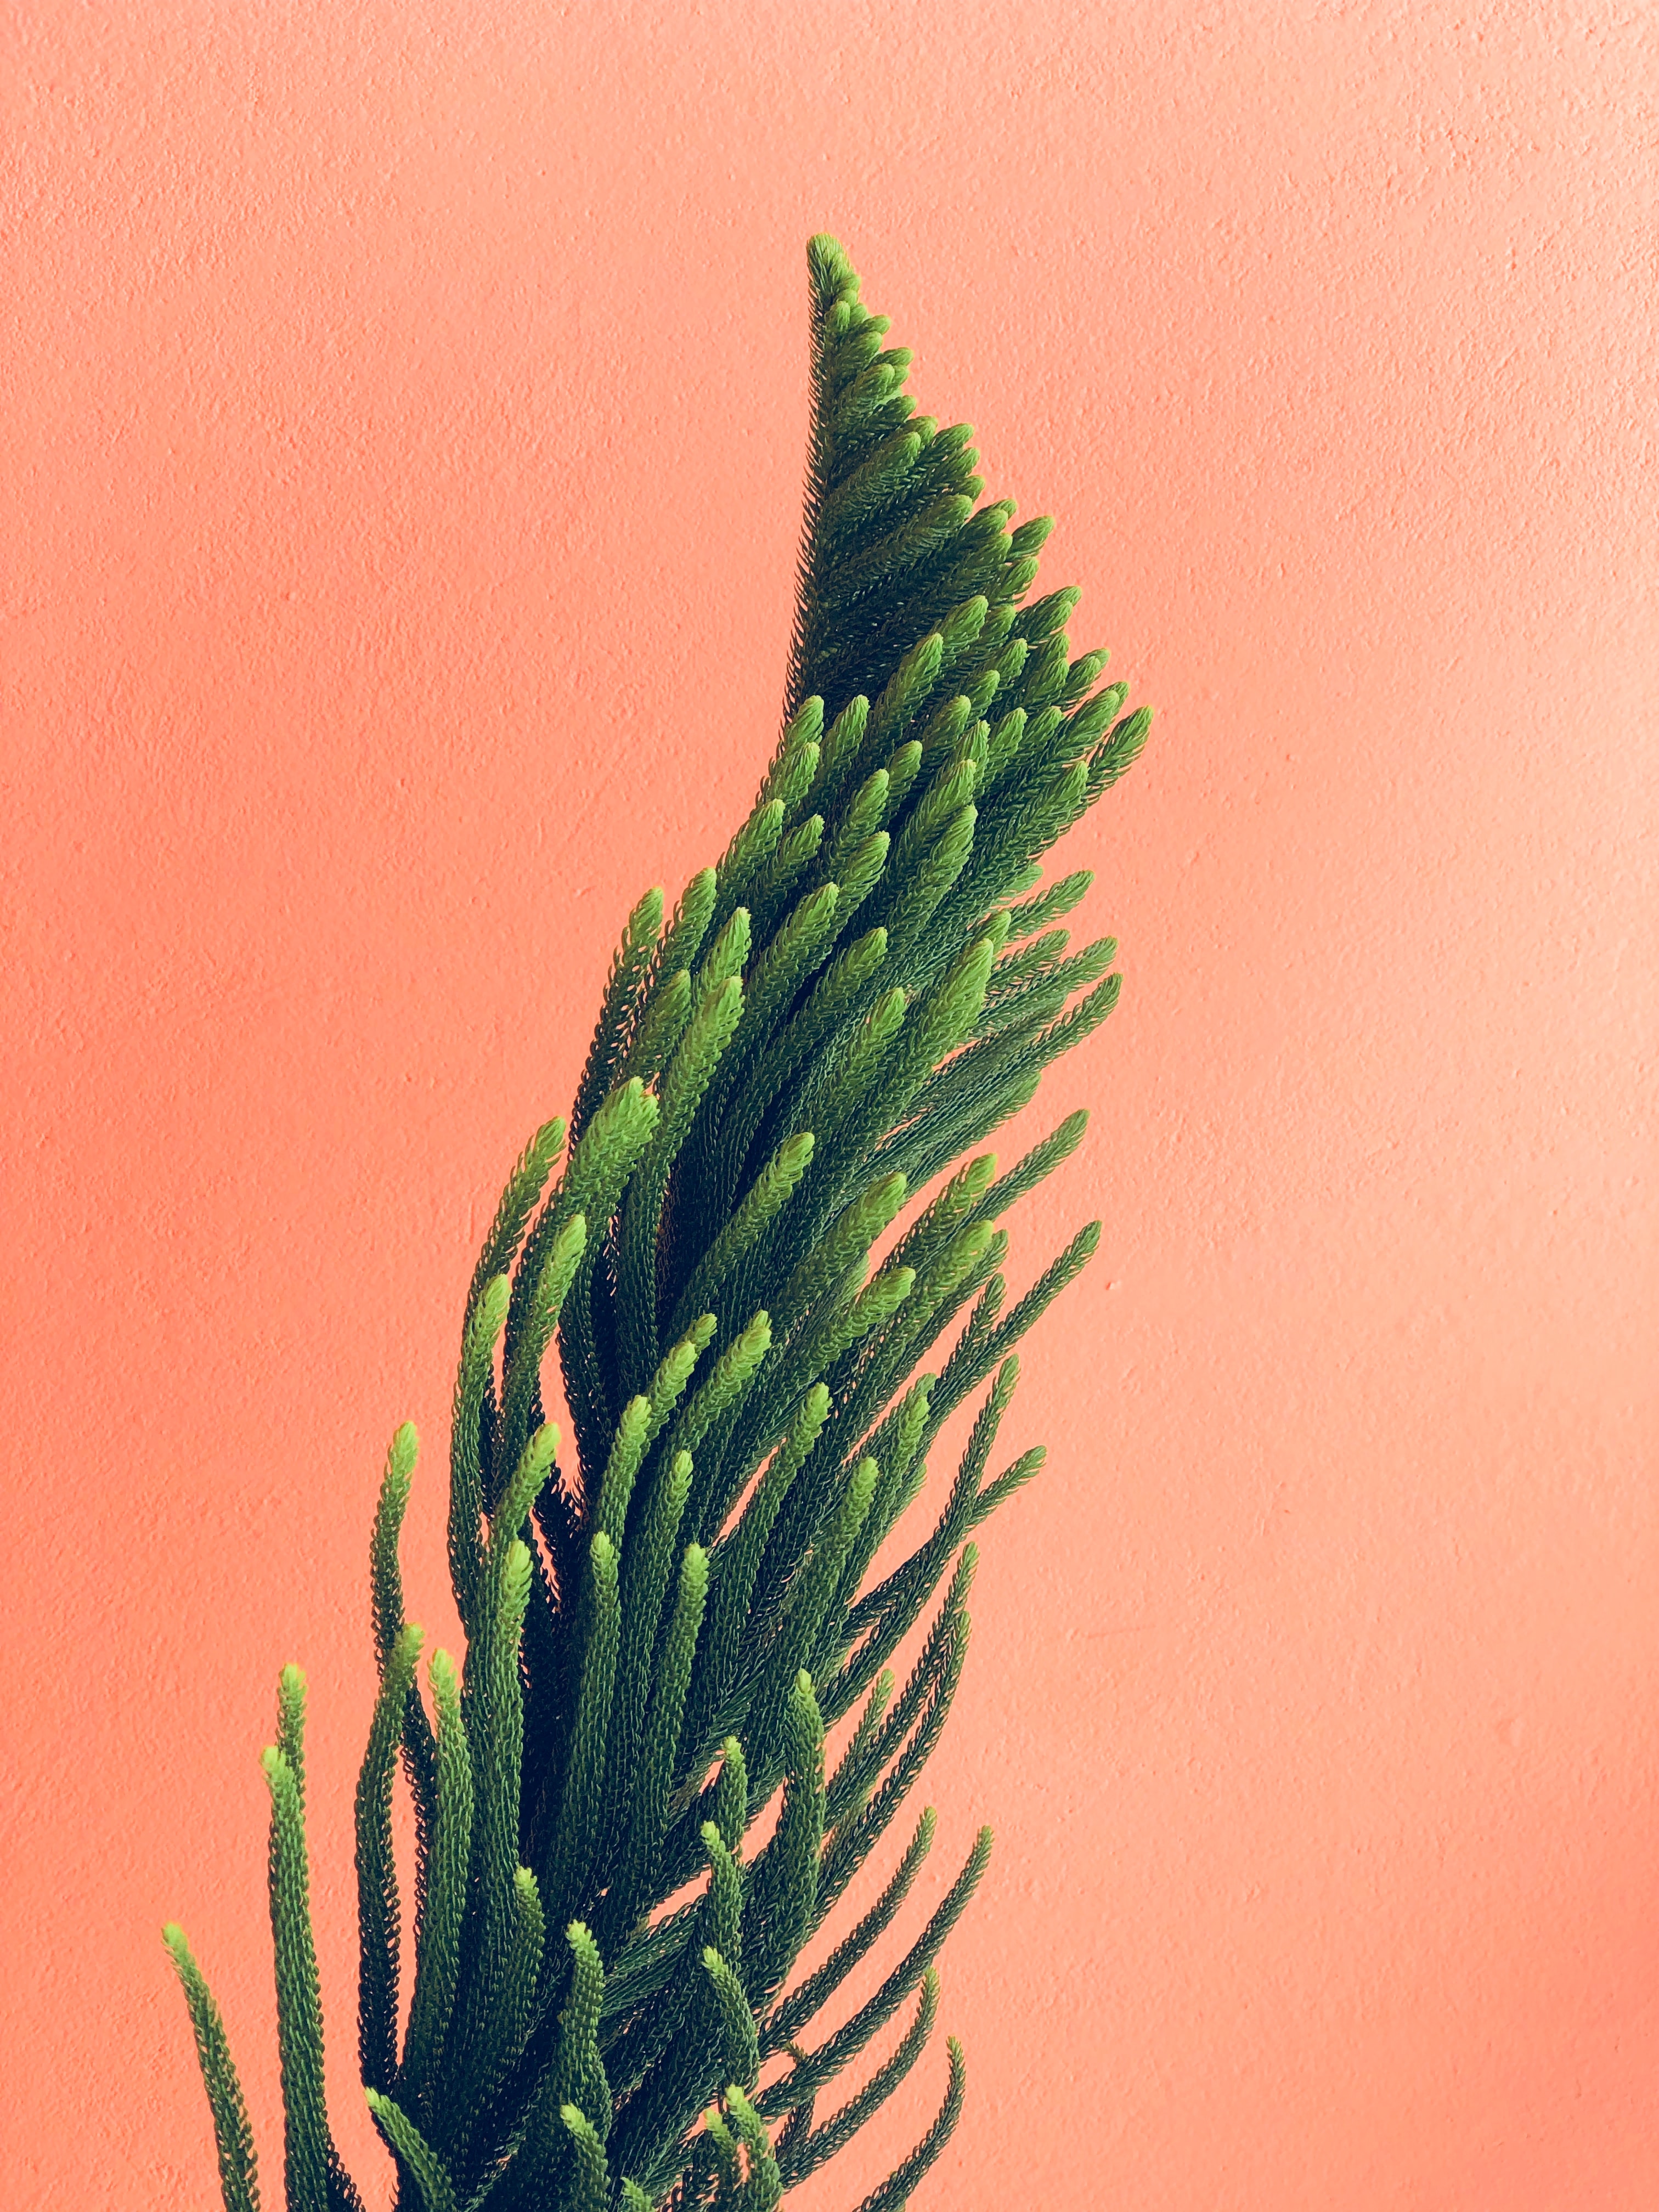 A header image of a plant